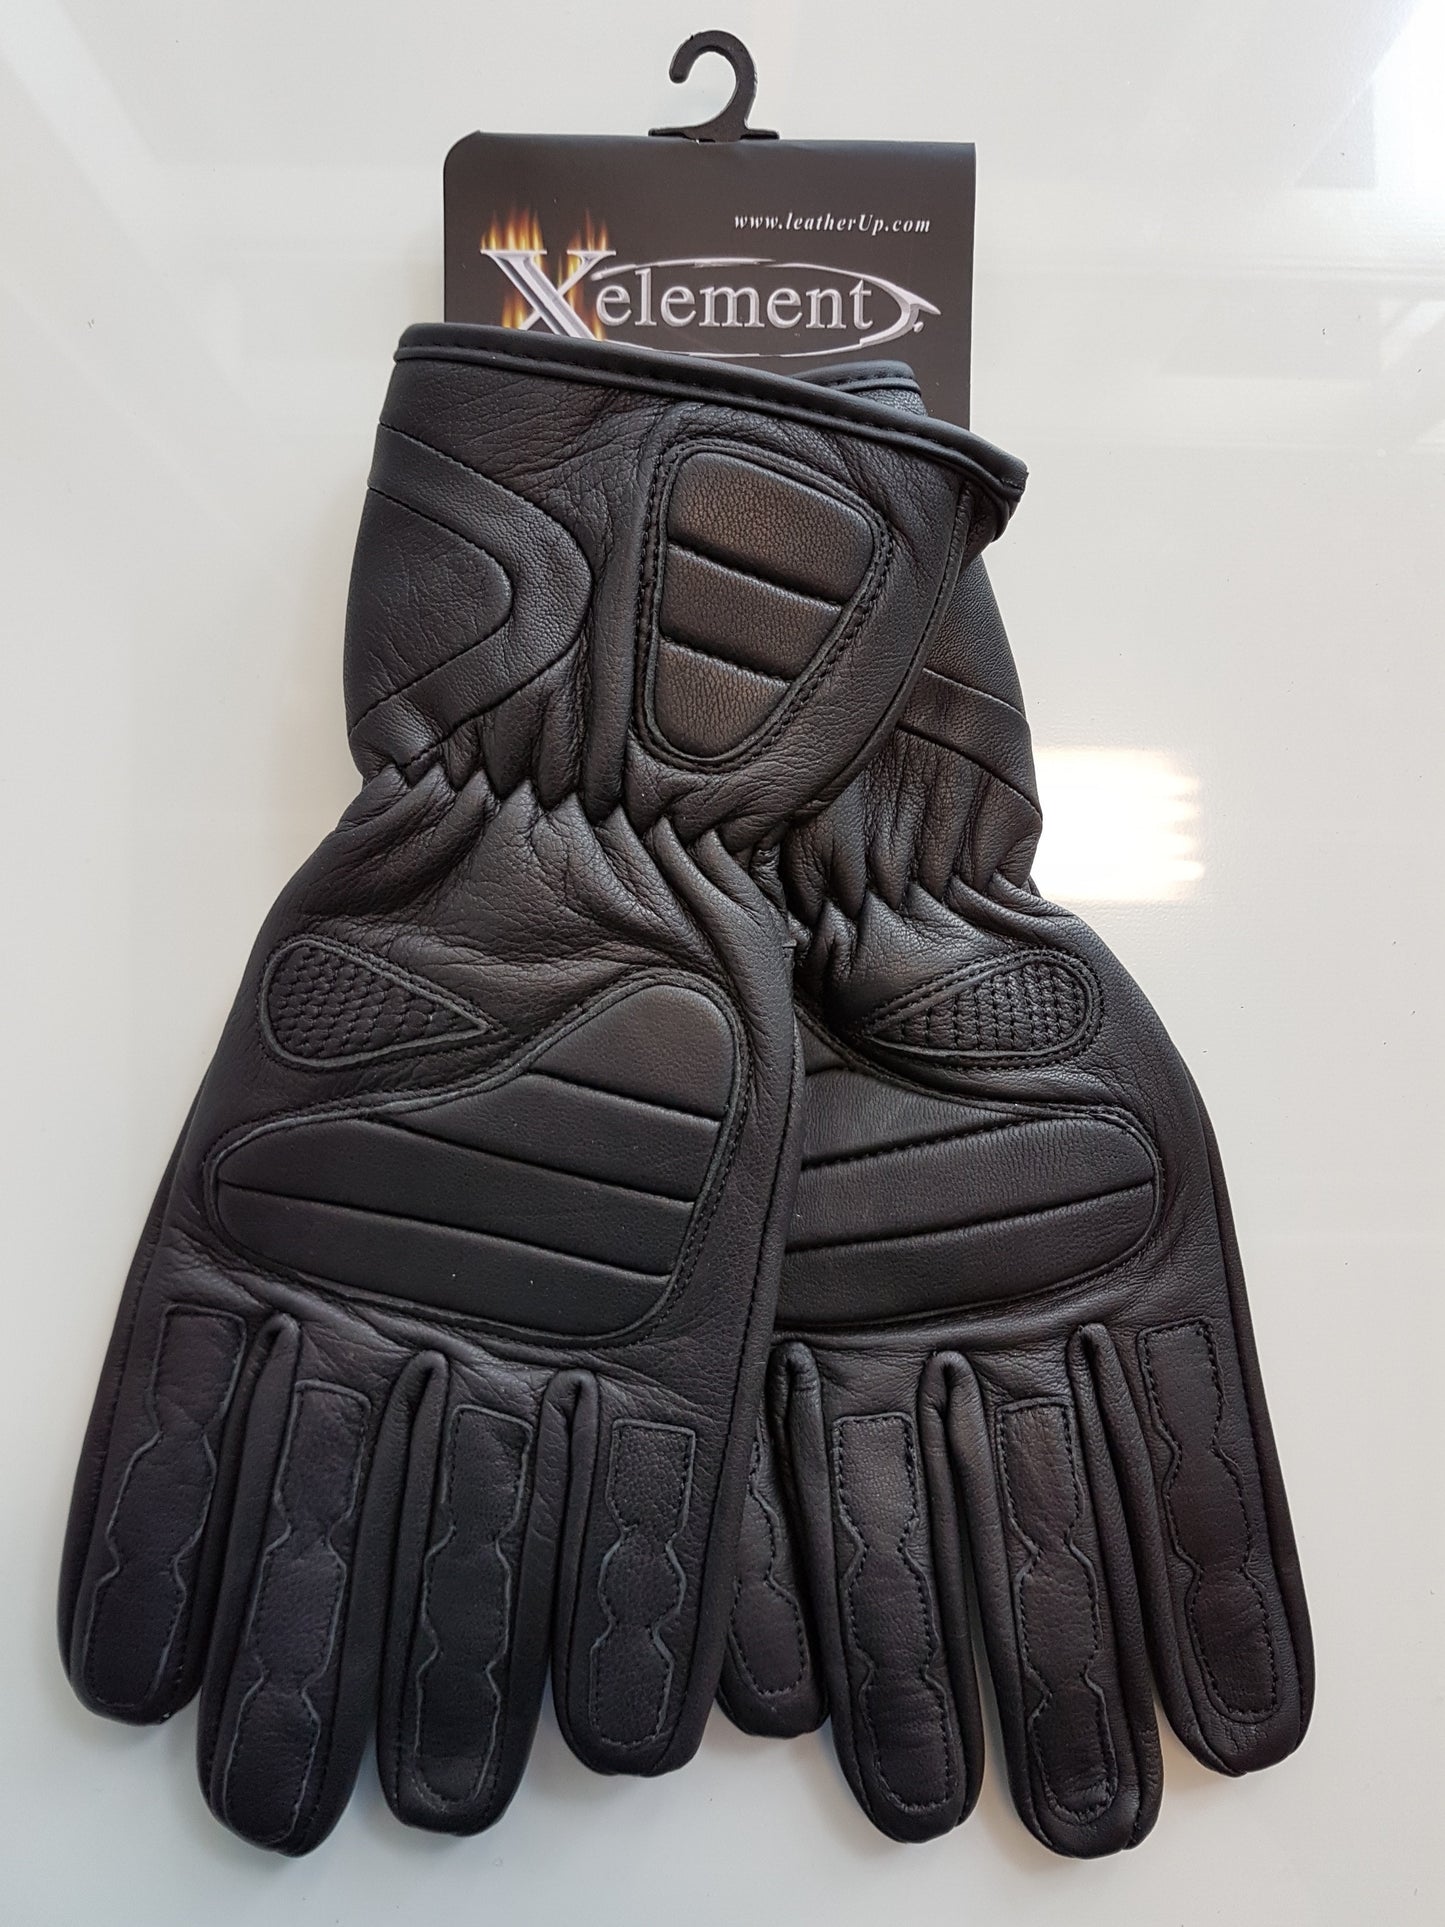 Xelement Guantlet Leather Padded